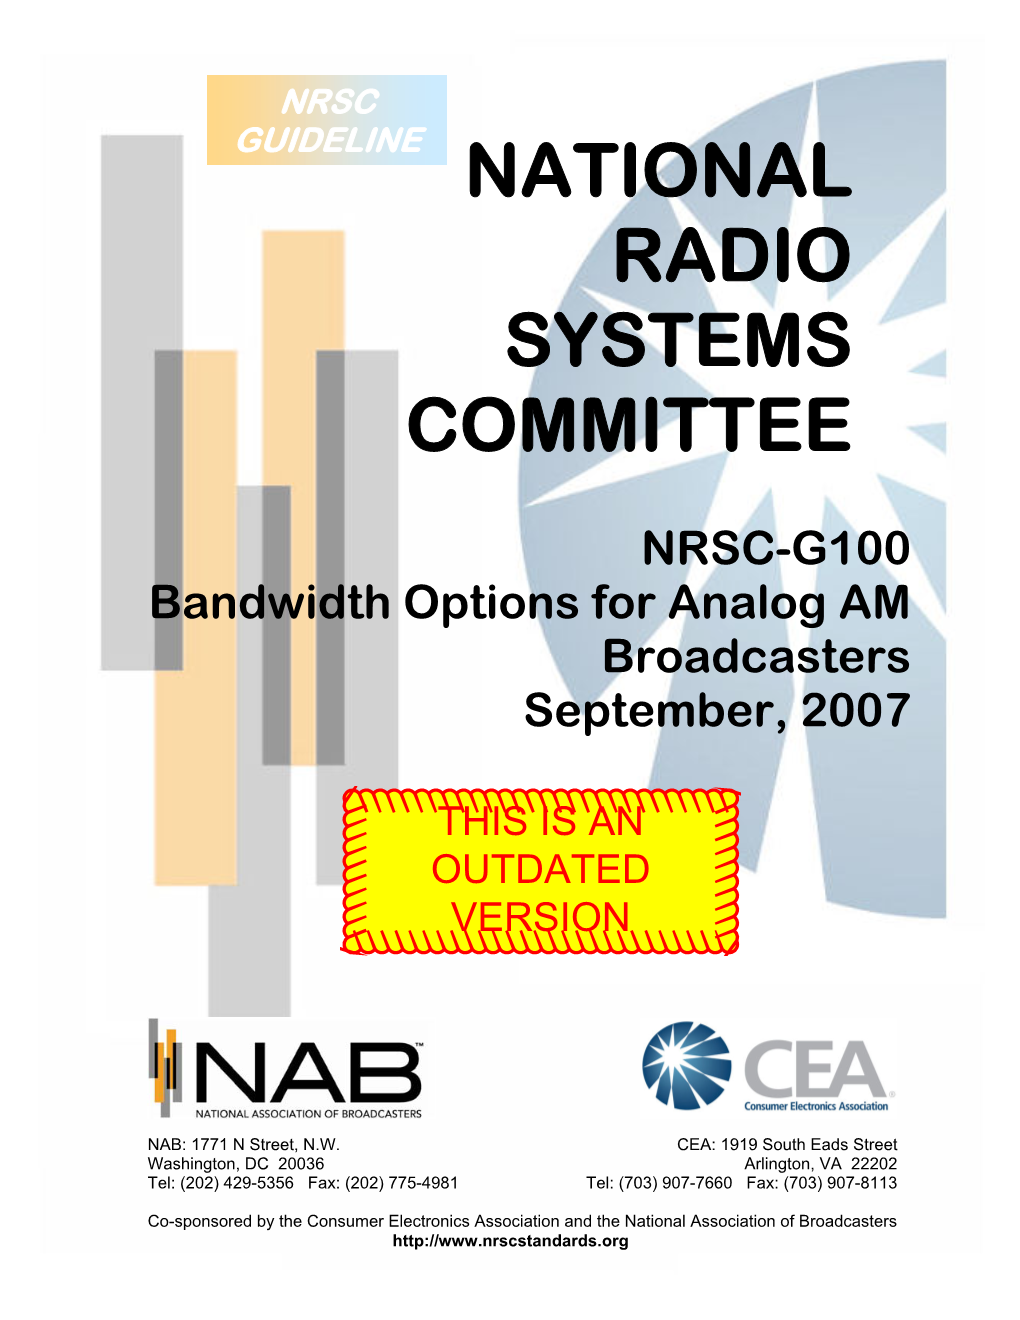 Bandwidth Options for Analog AM Broadcasters September, 2007